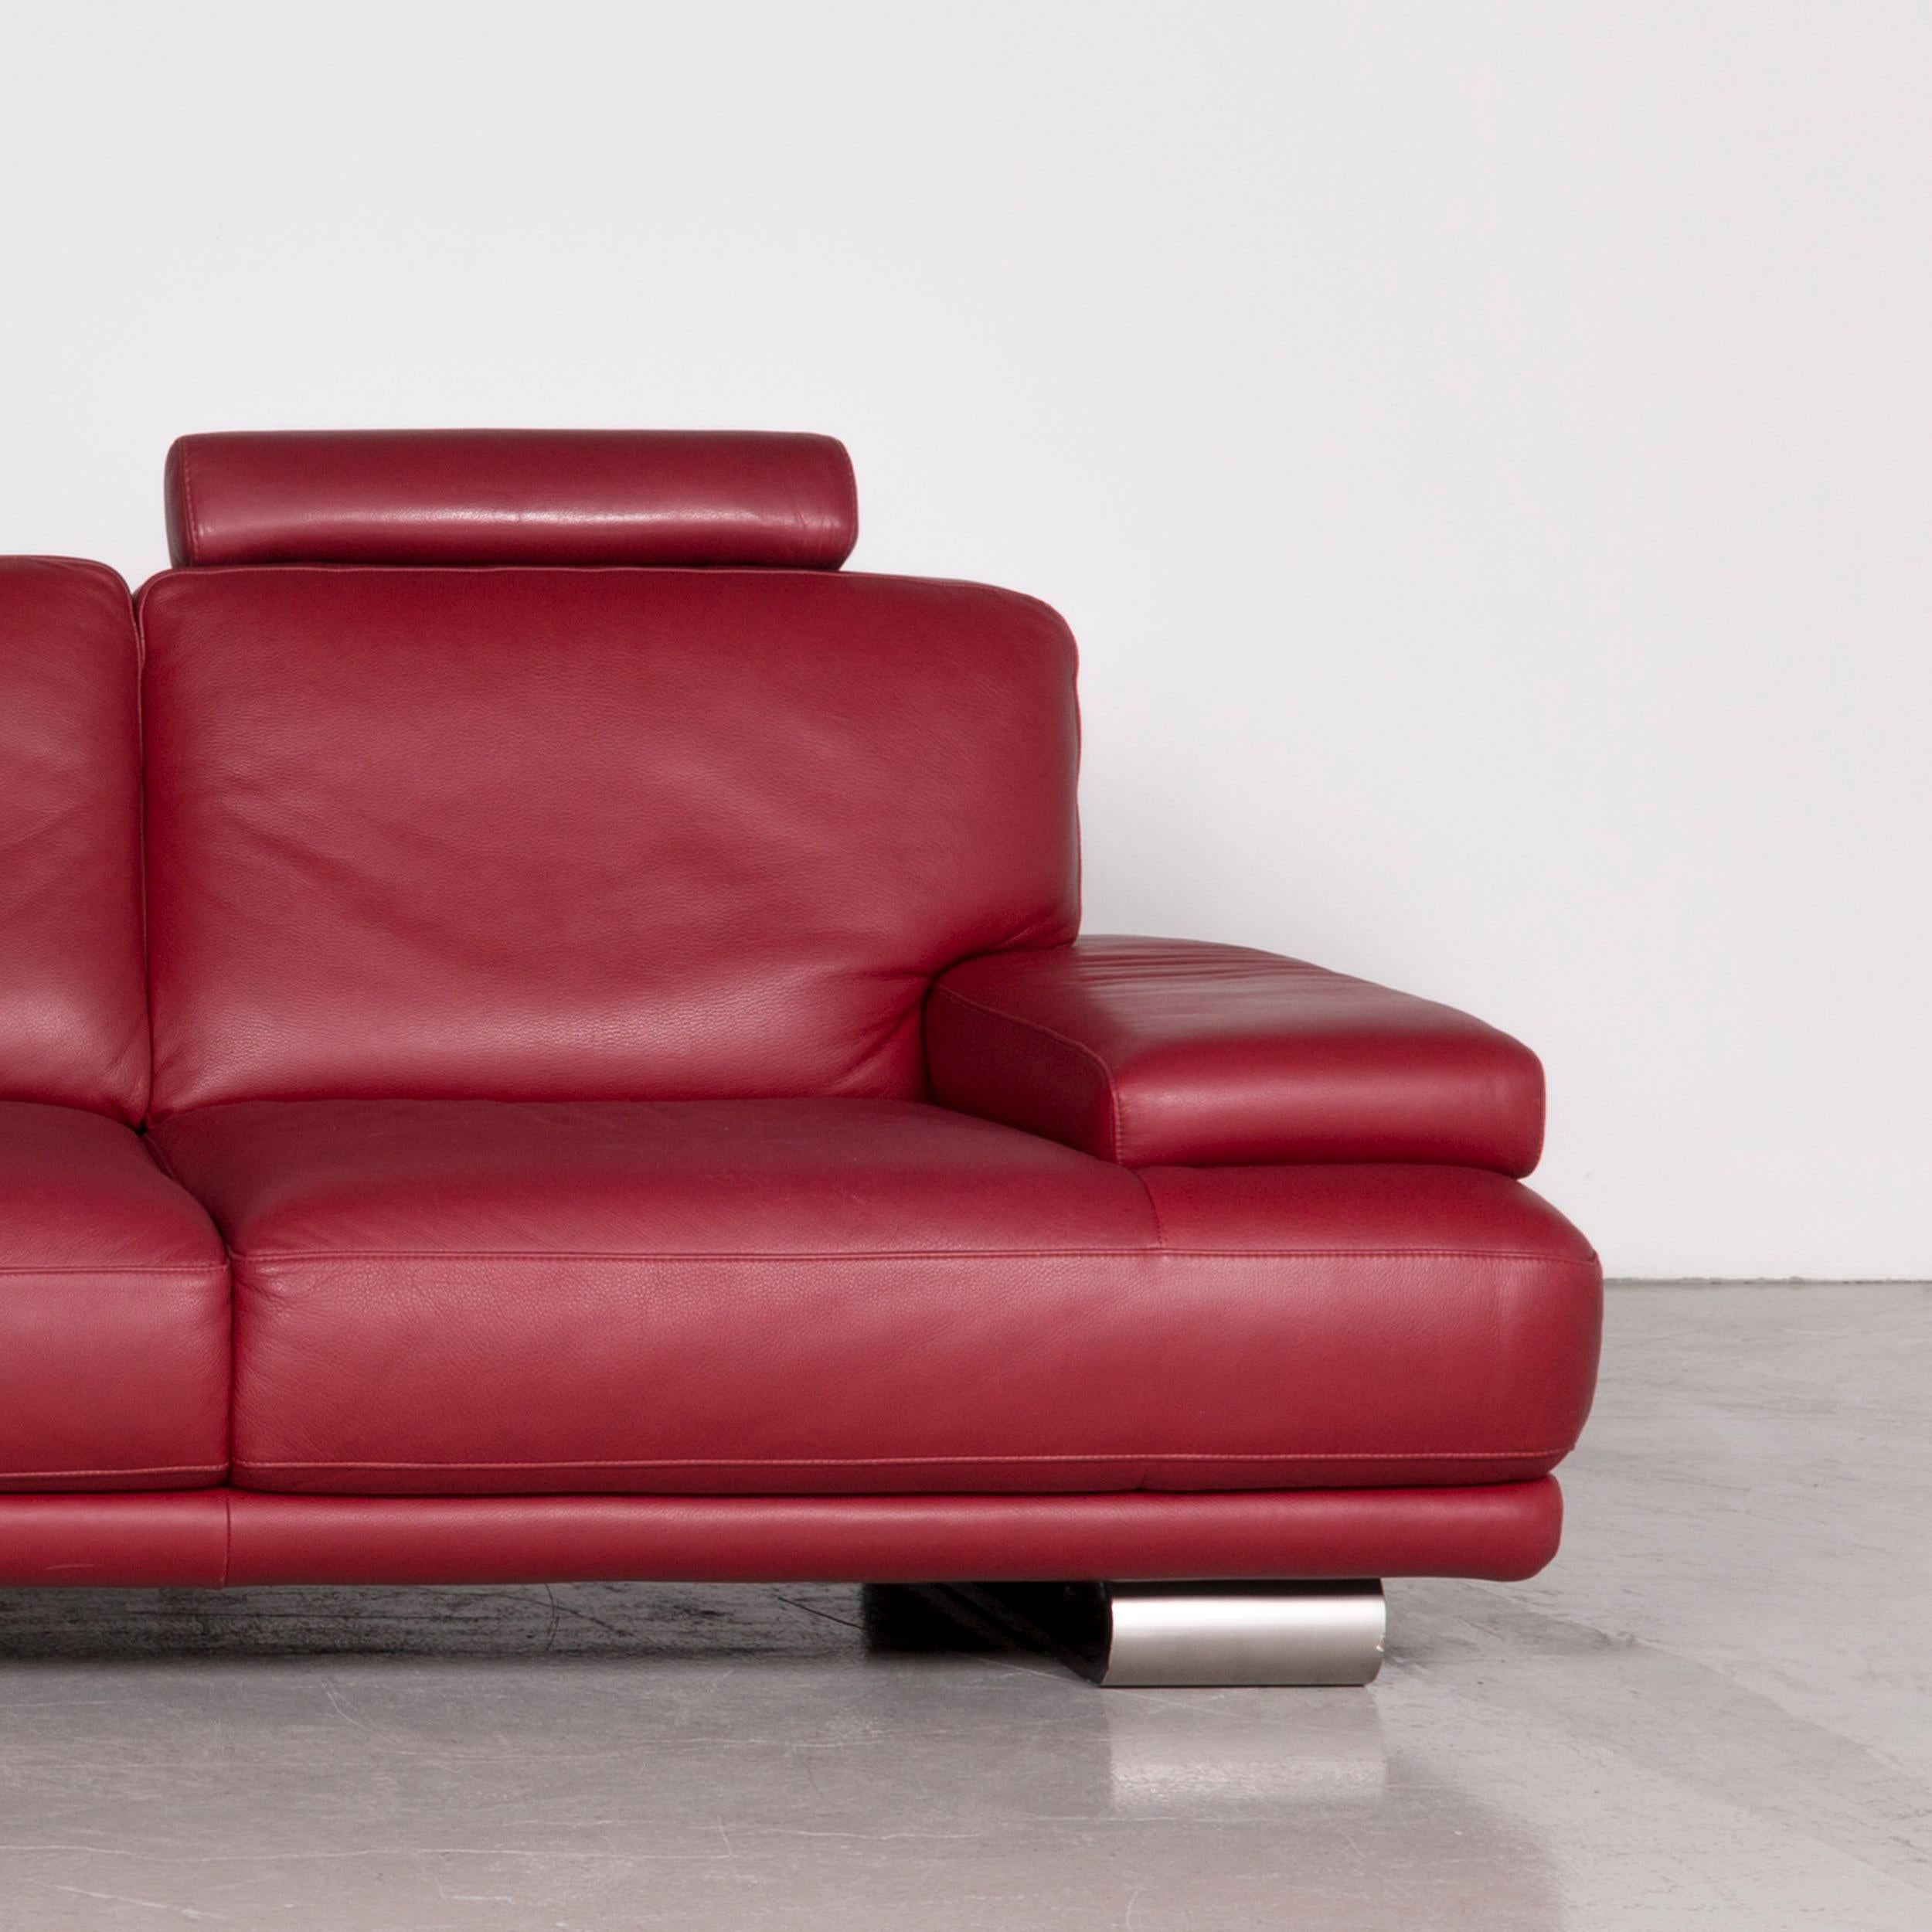 natuzzi red leather sectional